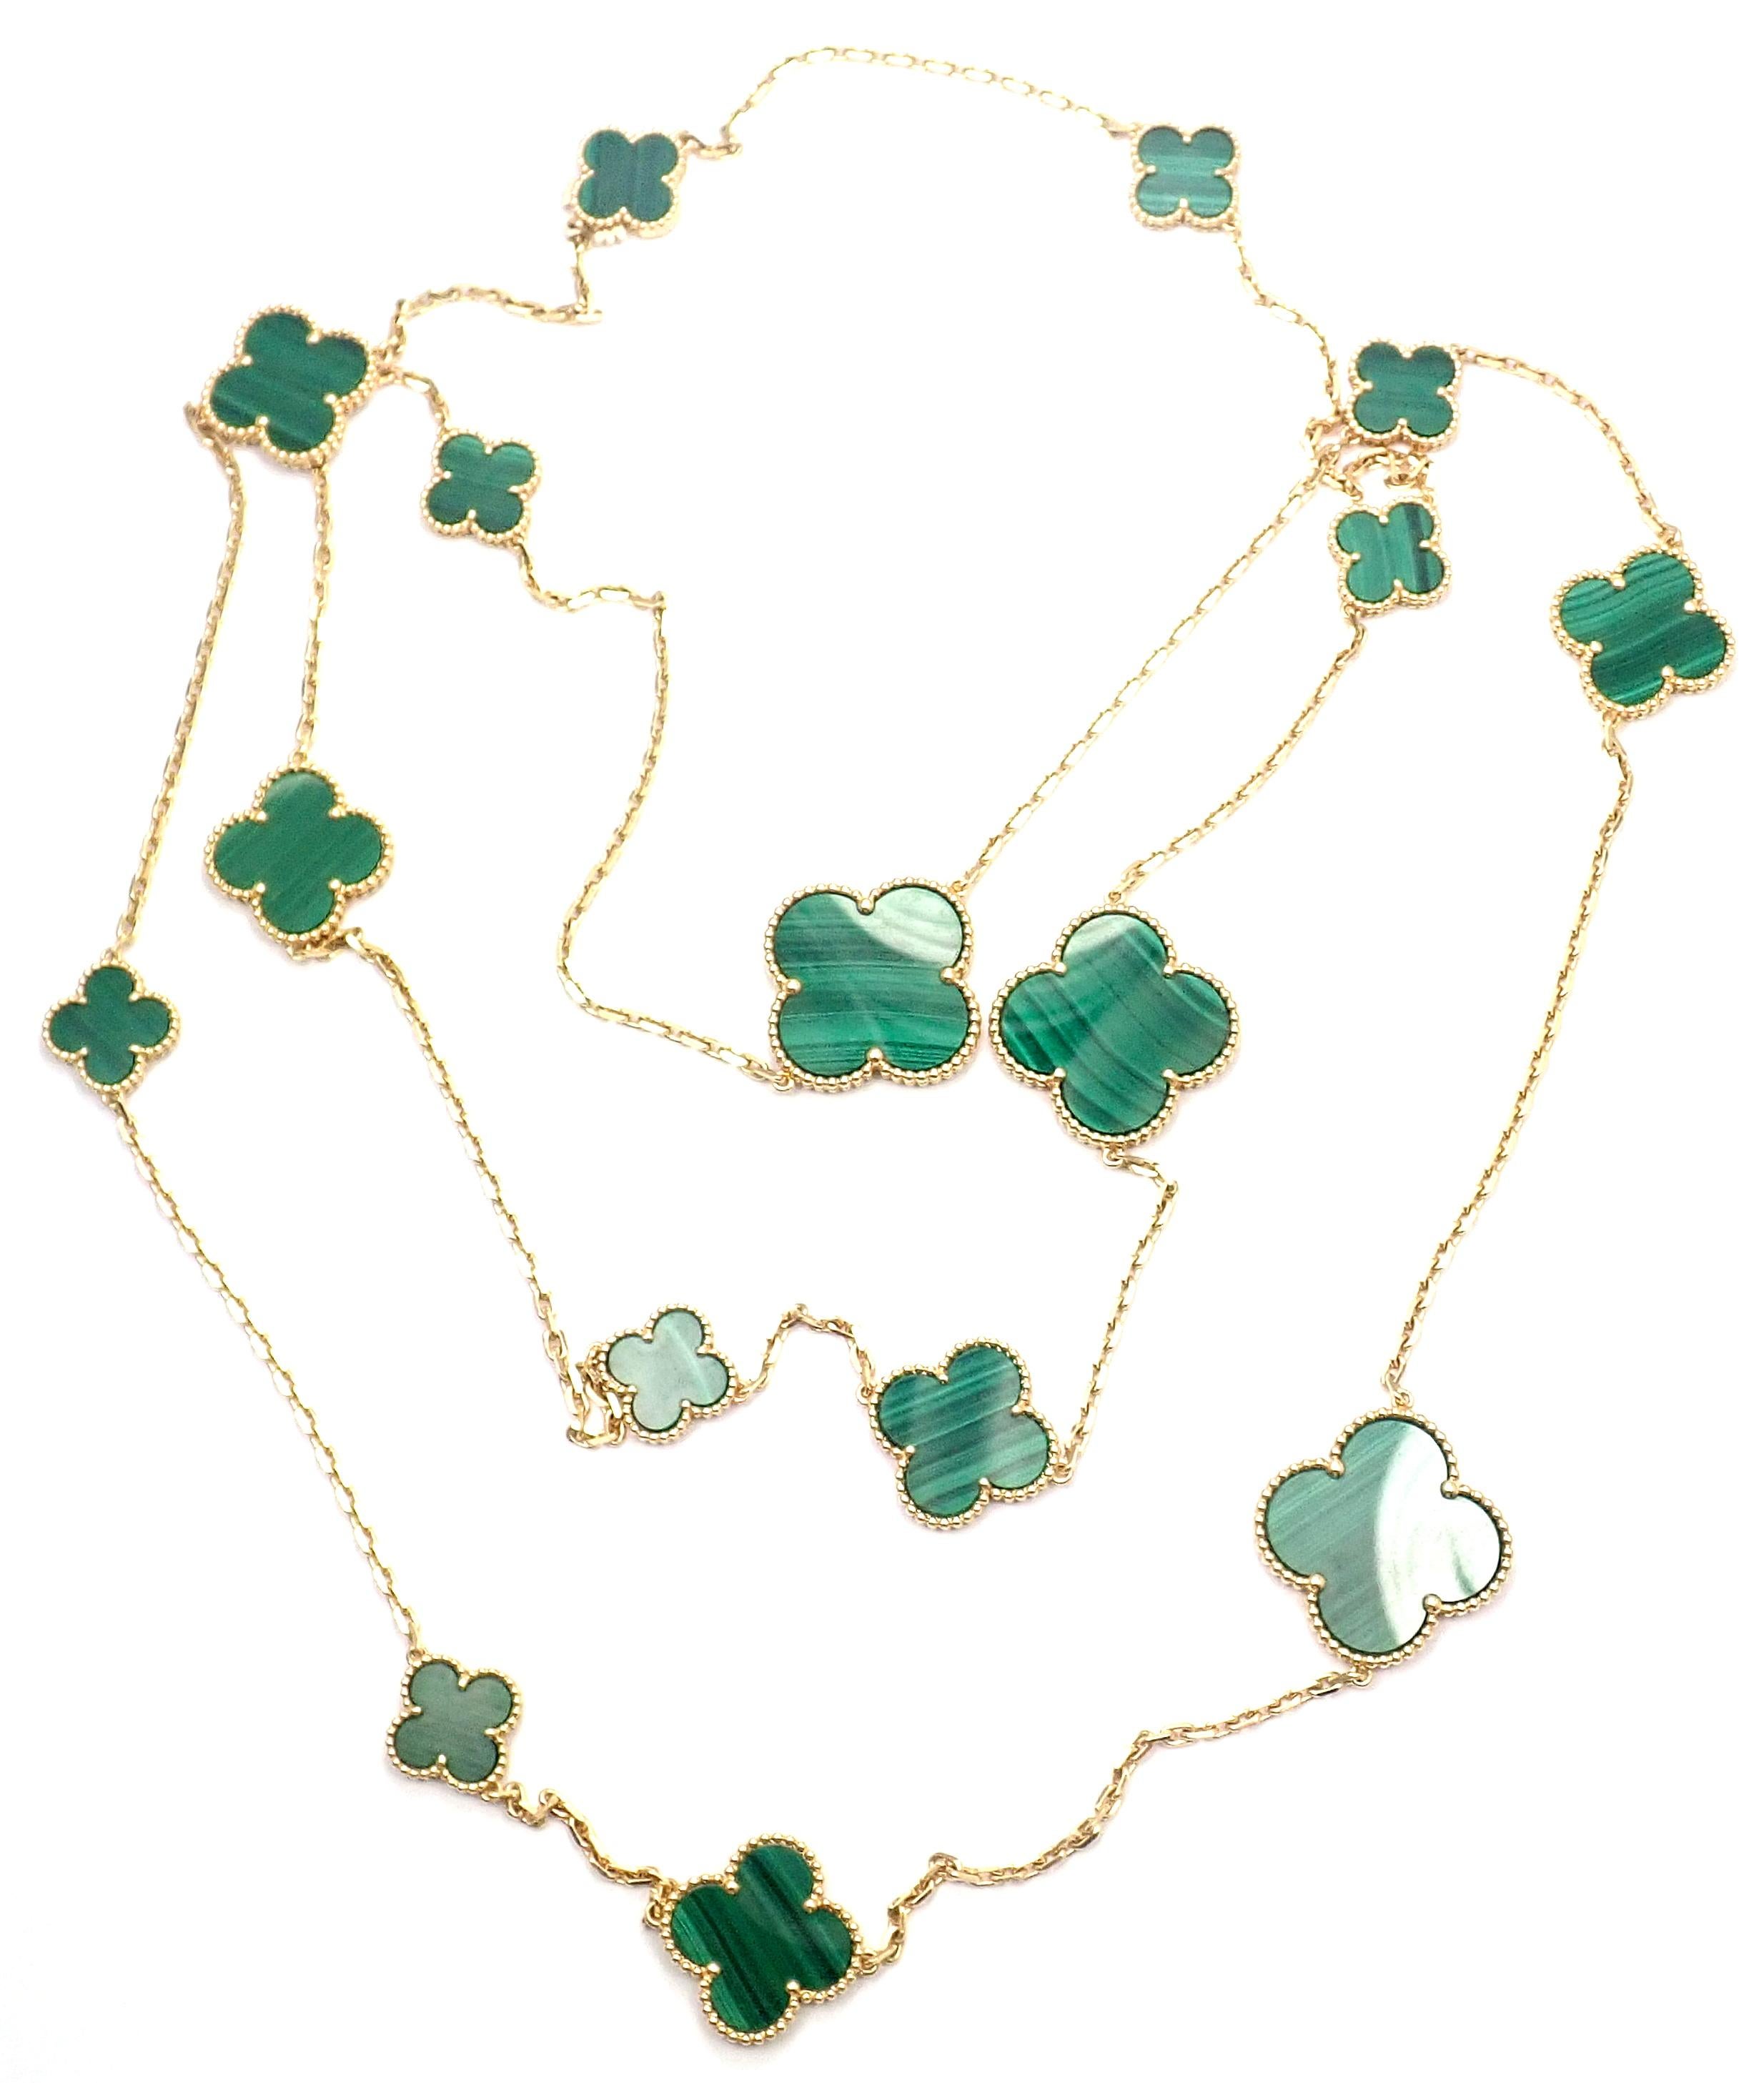 18k Yellow Gold Magic Malachite Alhambra Necklace by Van Cleef & Arpels.
With 3 Large Malachite stones: 26mm x 26mm
5 Medium Malachite Stones: 20mm x 20mm
8 Small Malachite Stones: 15mm x 15mm
This necklace comes with Van Cleef & Arpels certificate